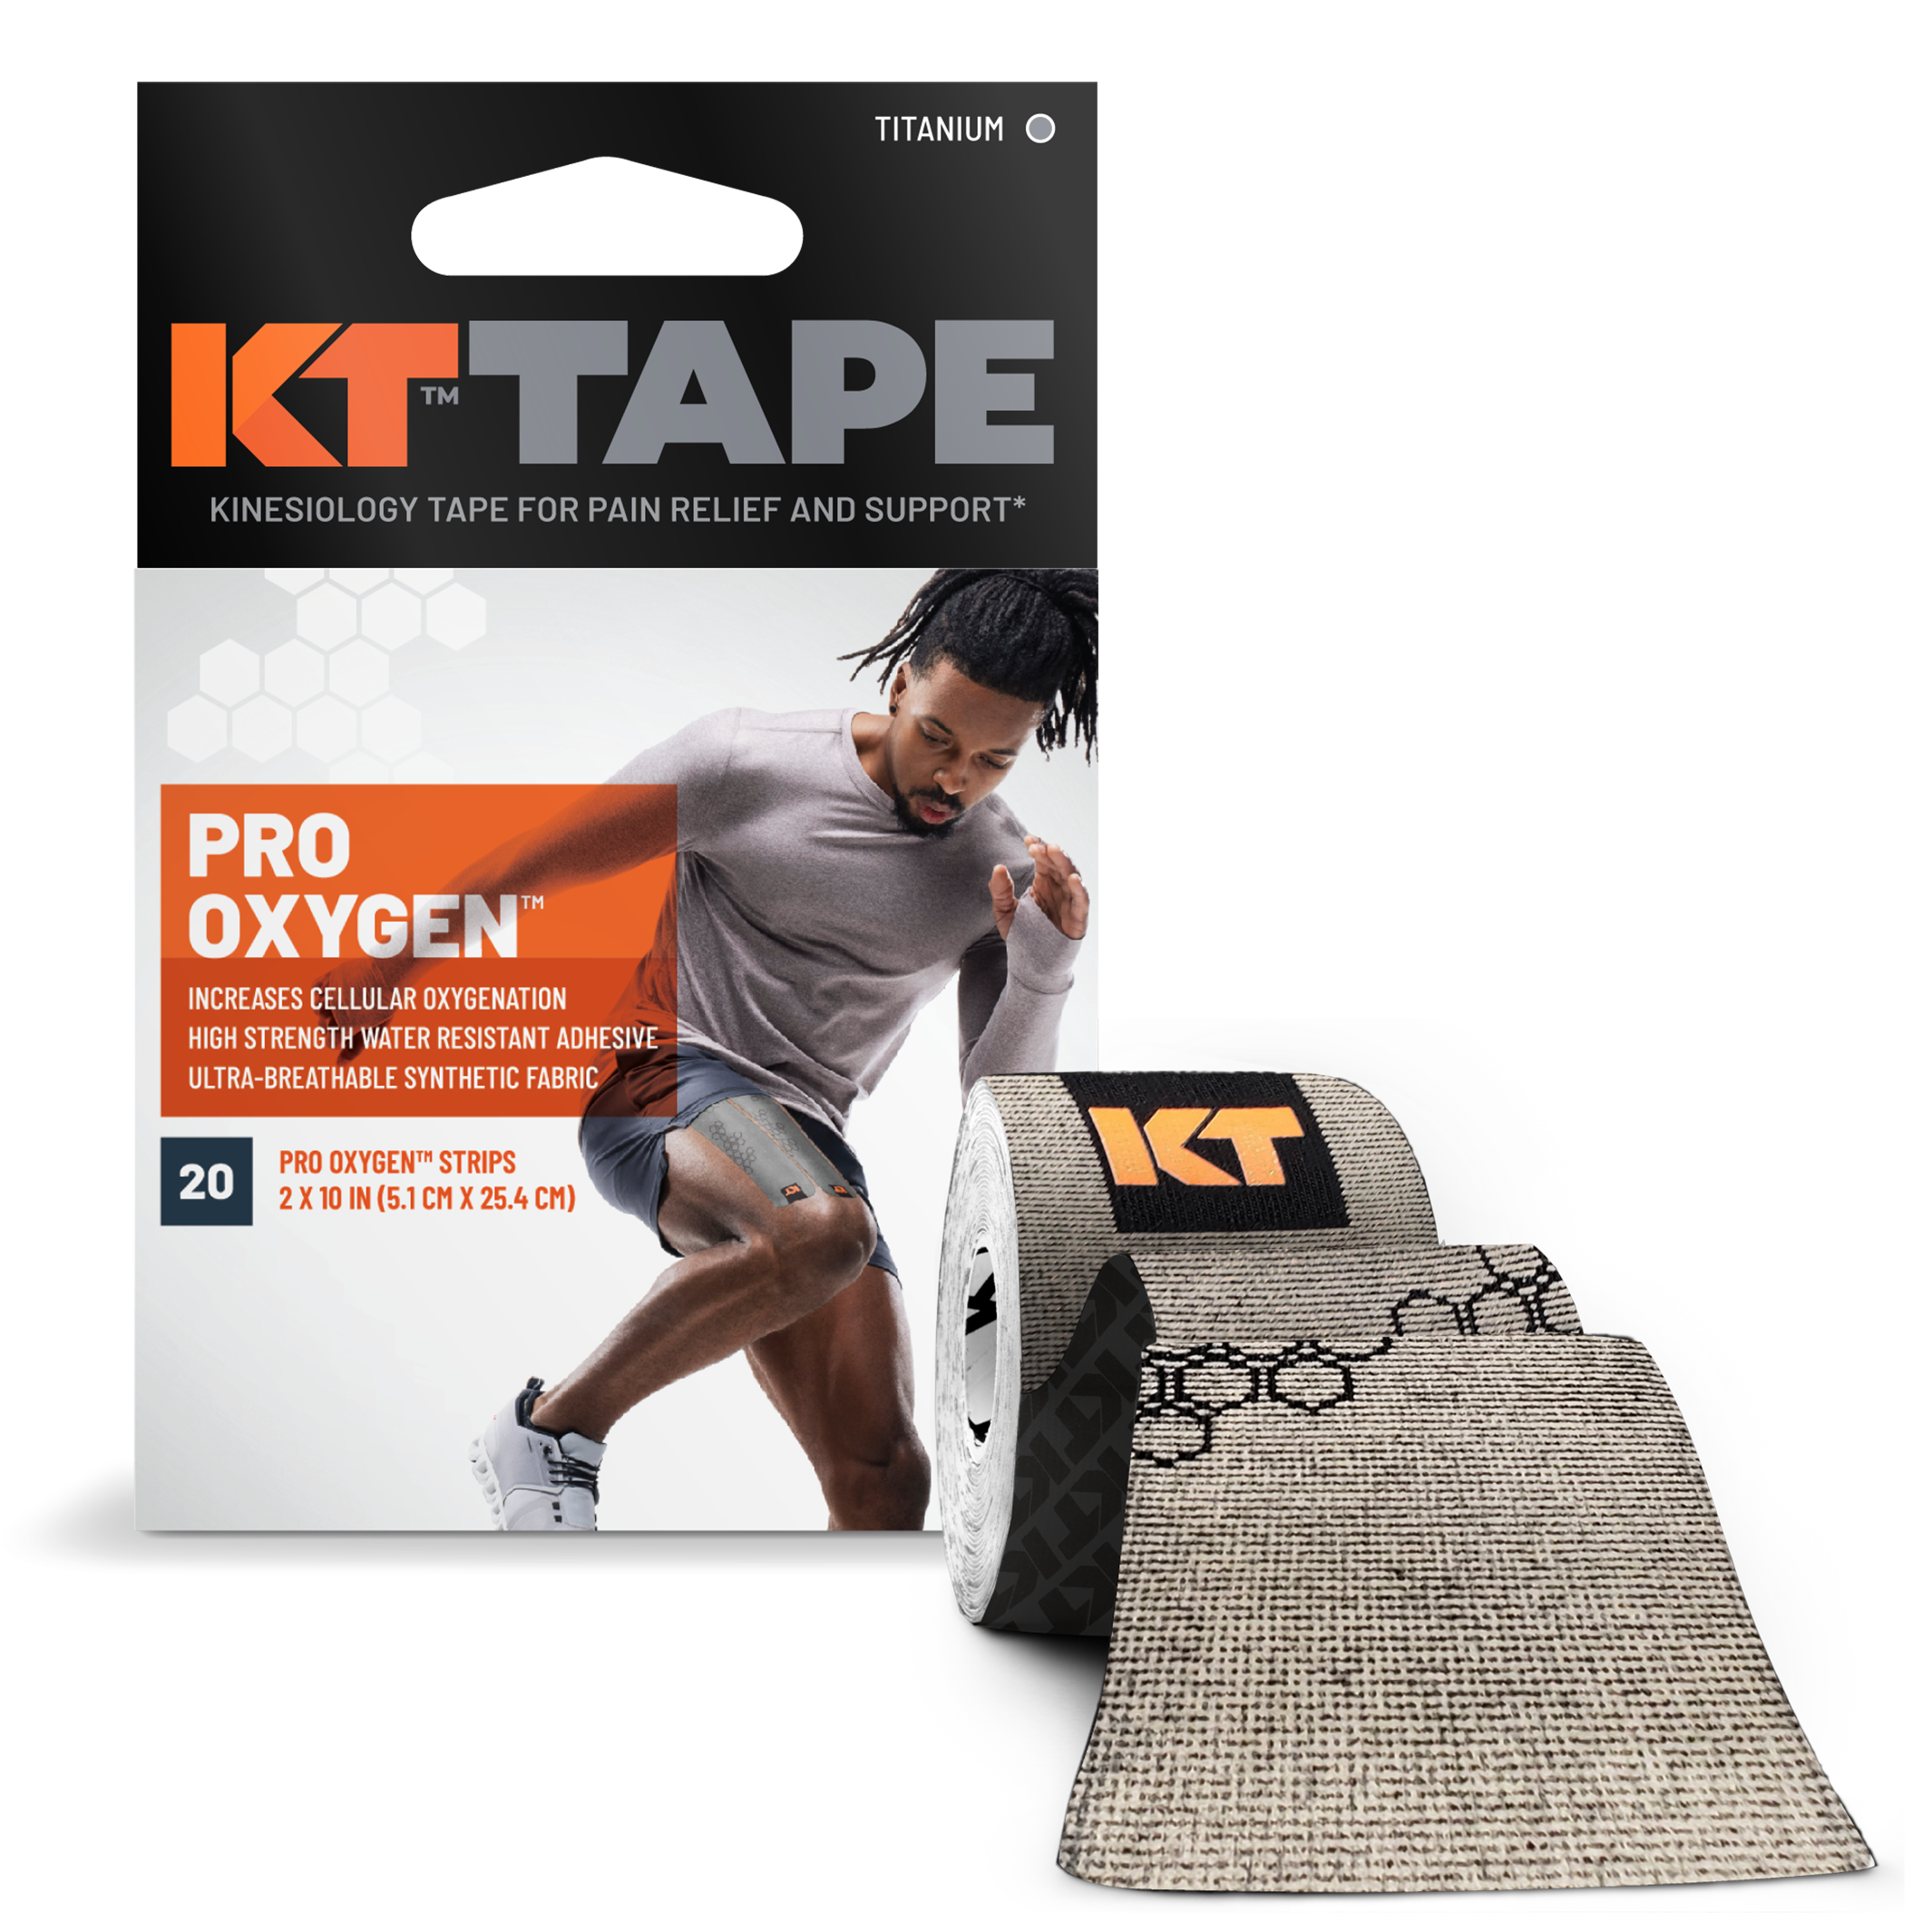 KT Tape Pro Oxygen box with tape roll